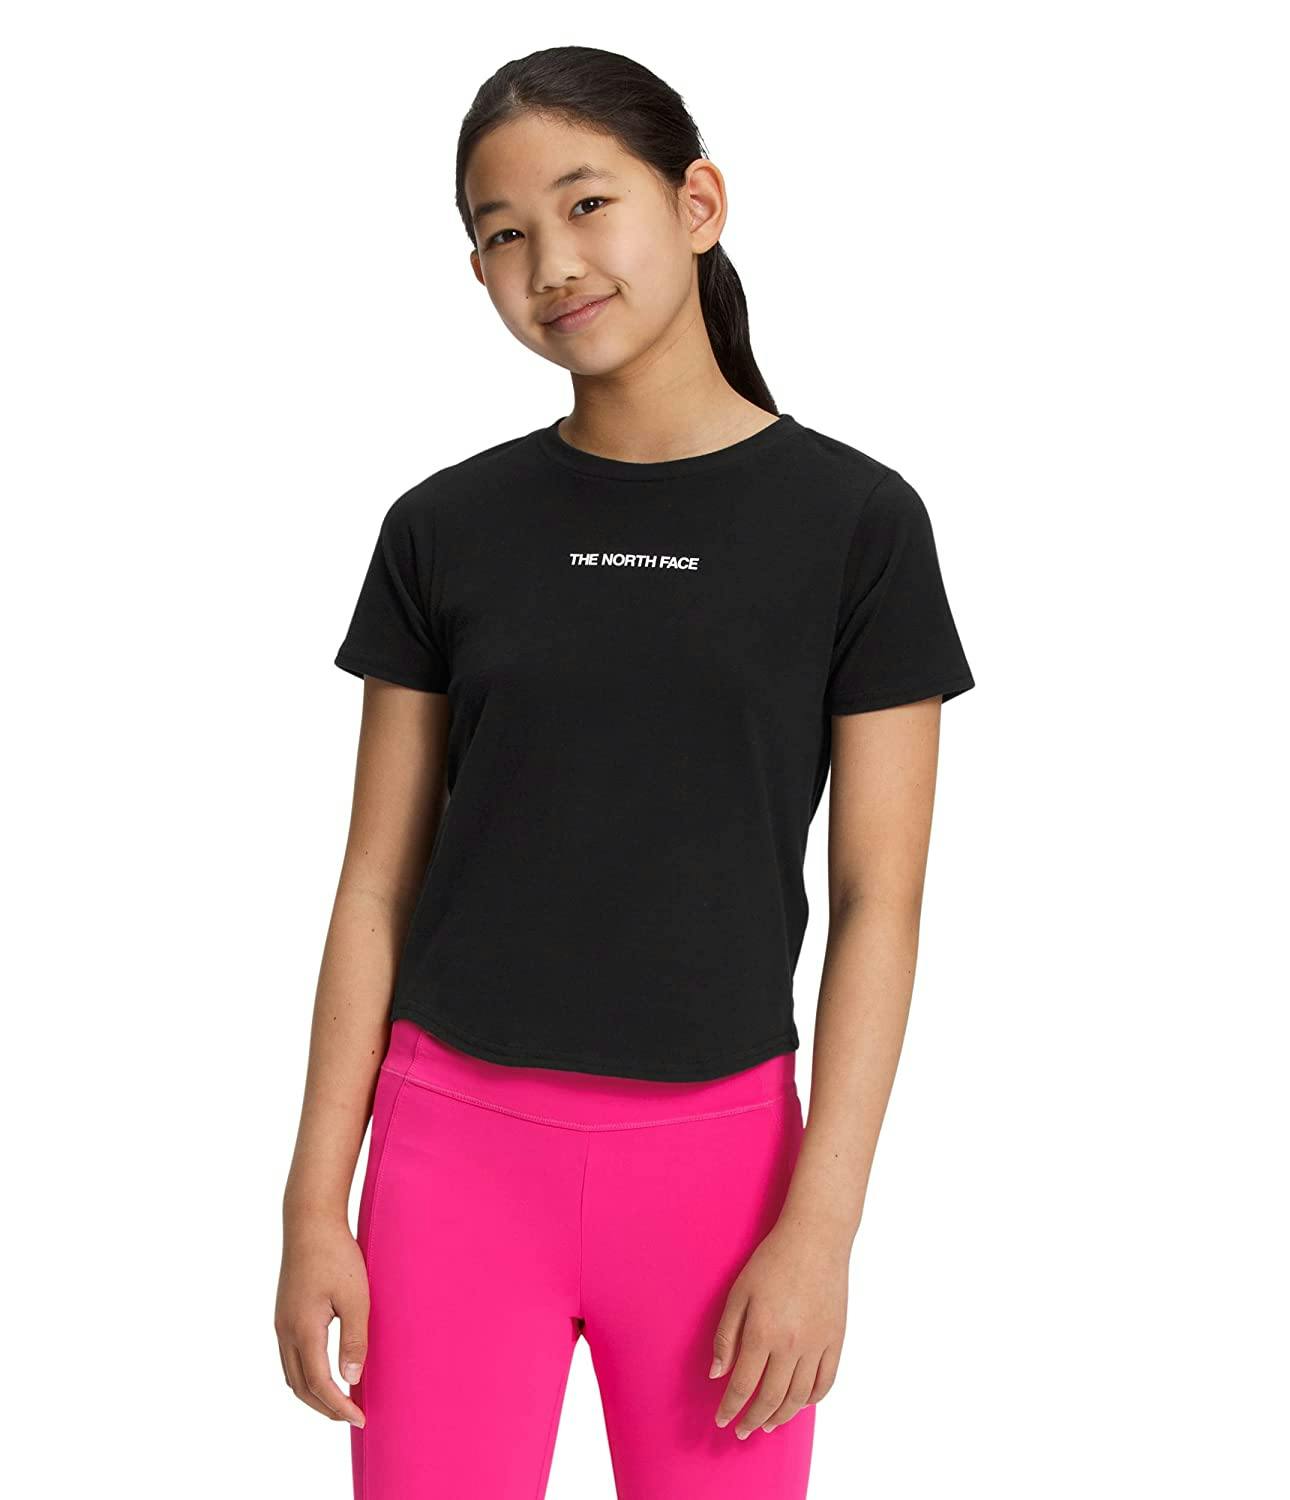 The North Face Girls SS Graphic Tee